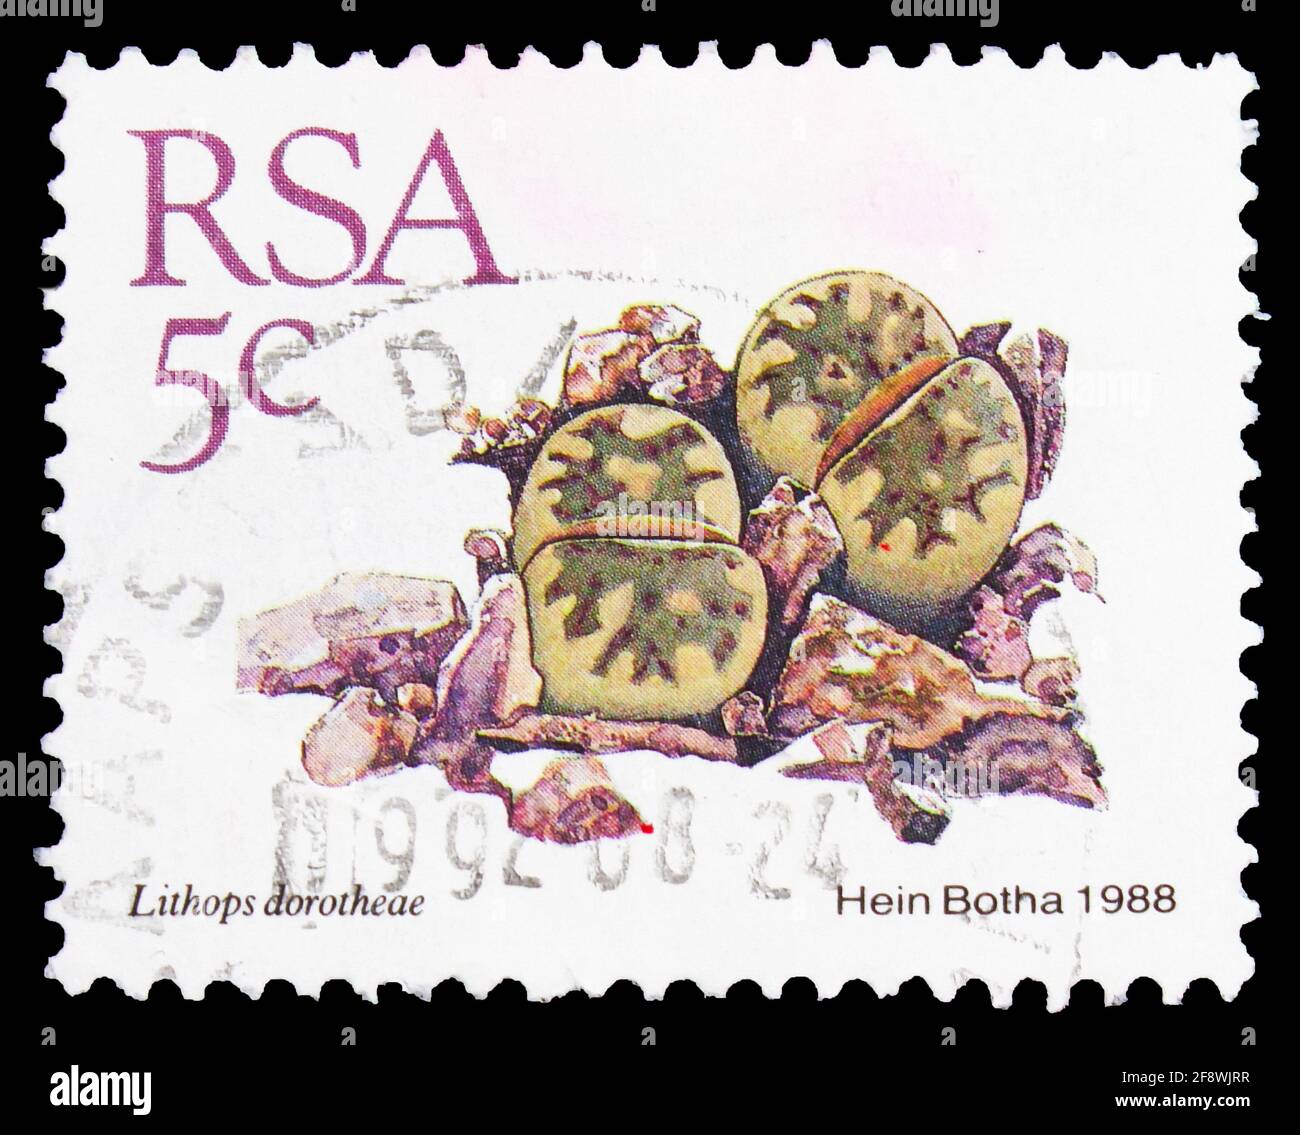 MOSCOW, RUSSIA - OCTOBER 1, 2019: Postage stamp printed in South Africa shows Lithops dorotheae, Definitive Issue - Succulents reprint, more vivid col Stock Photo